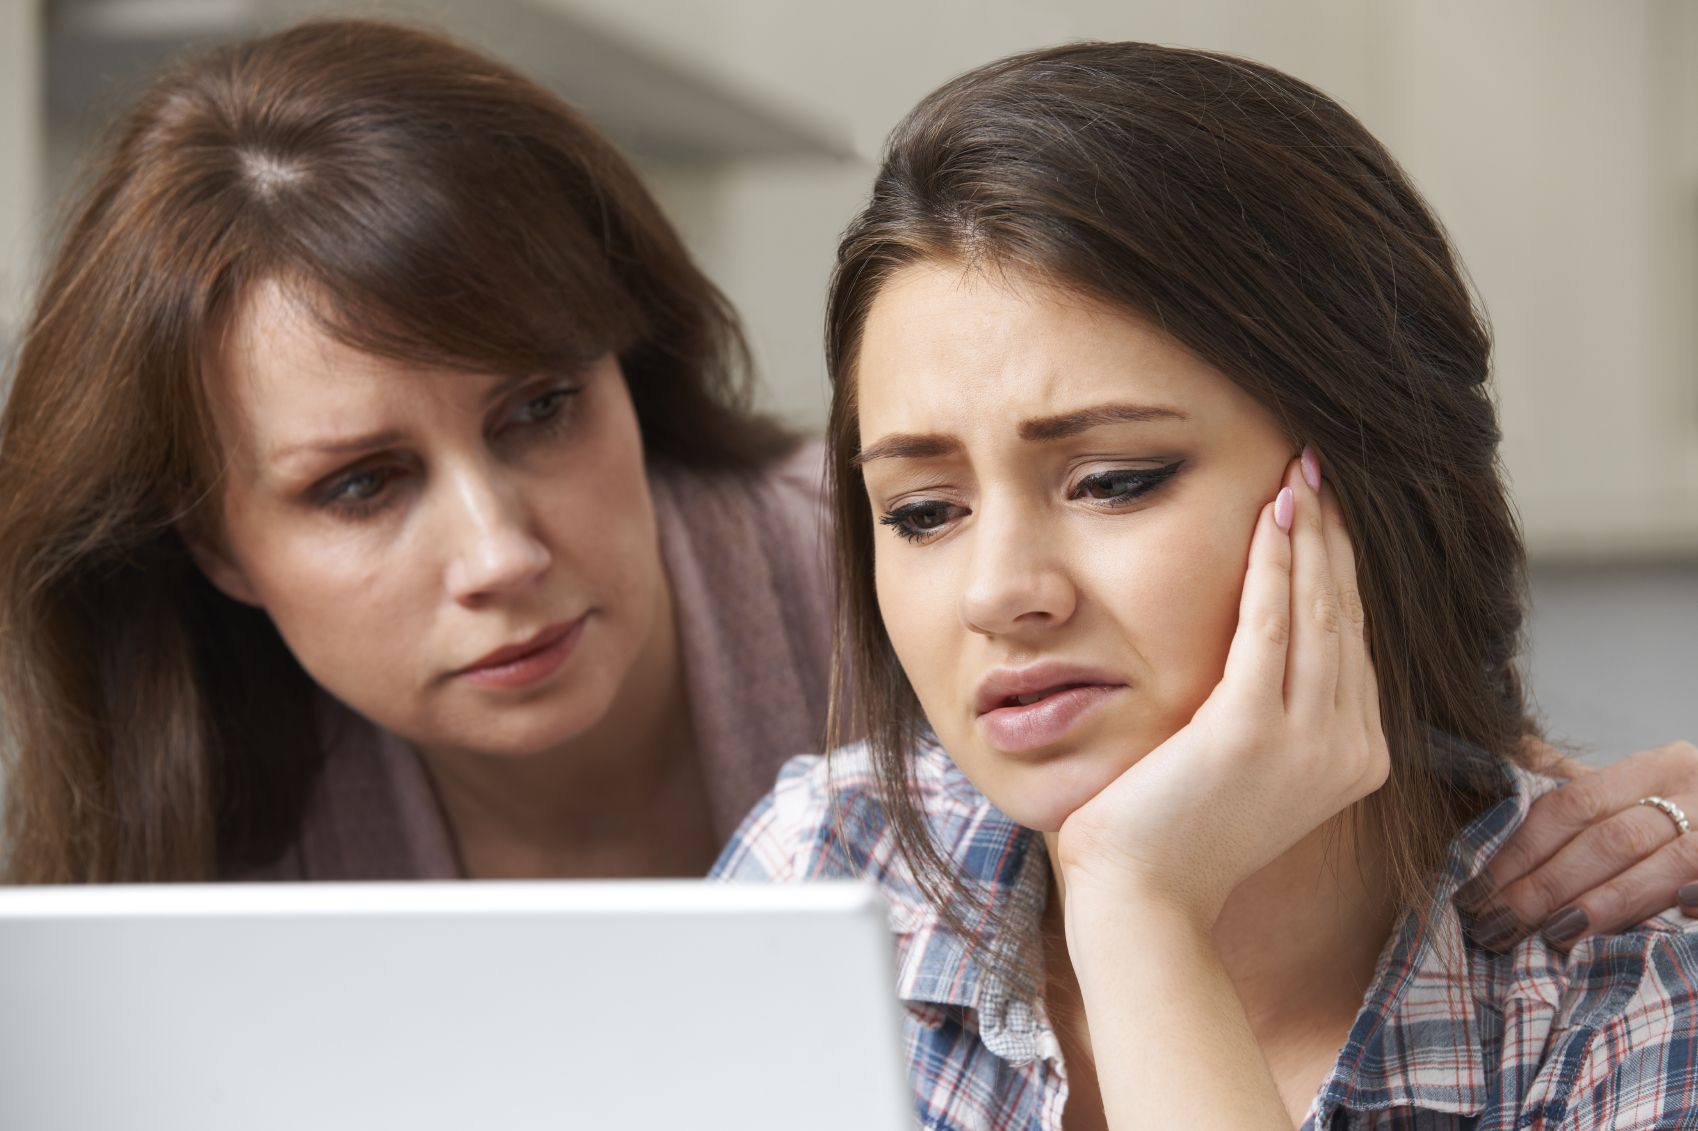 Mom empathizes and comforts her stressed teenage daughter